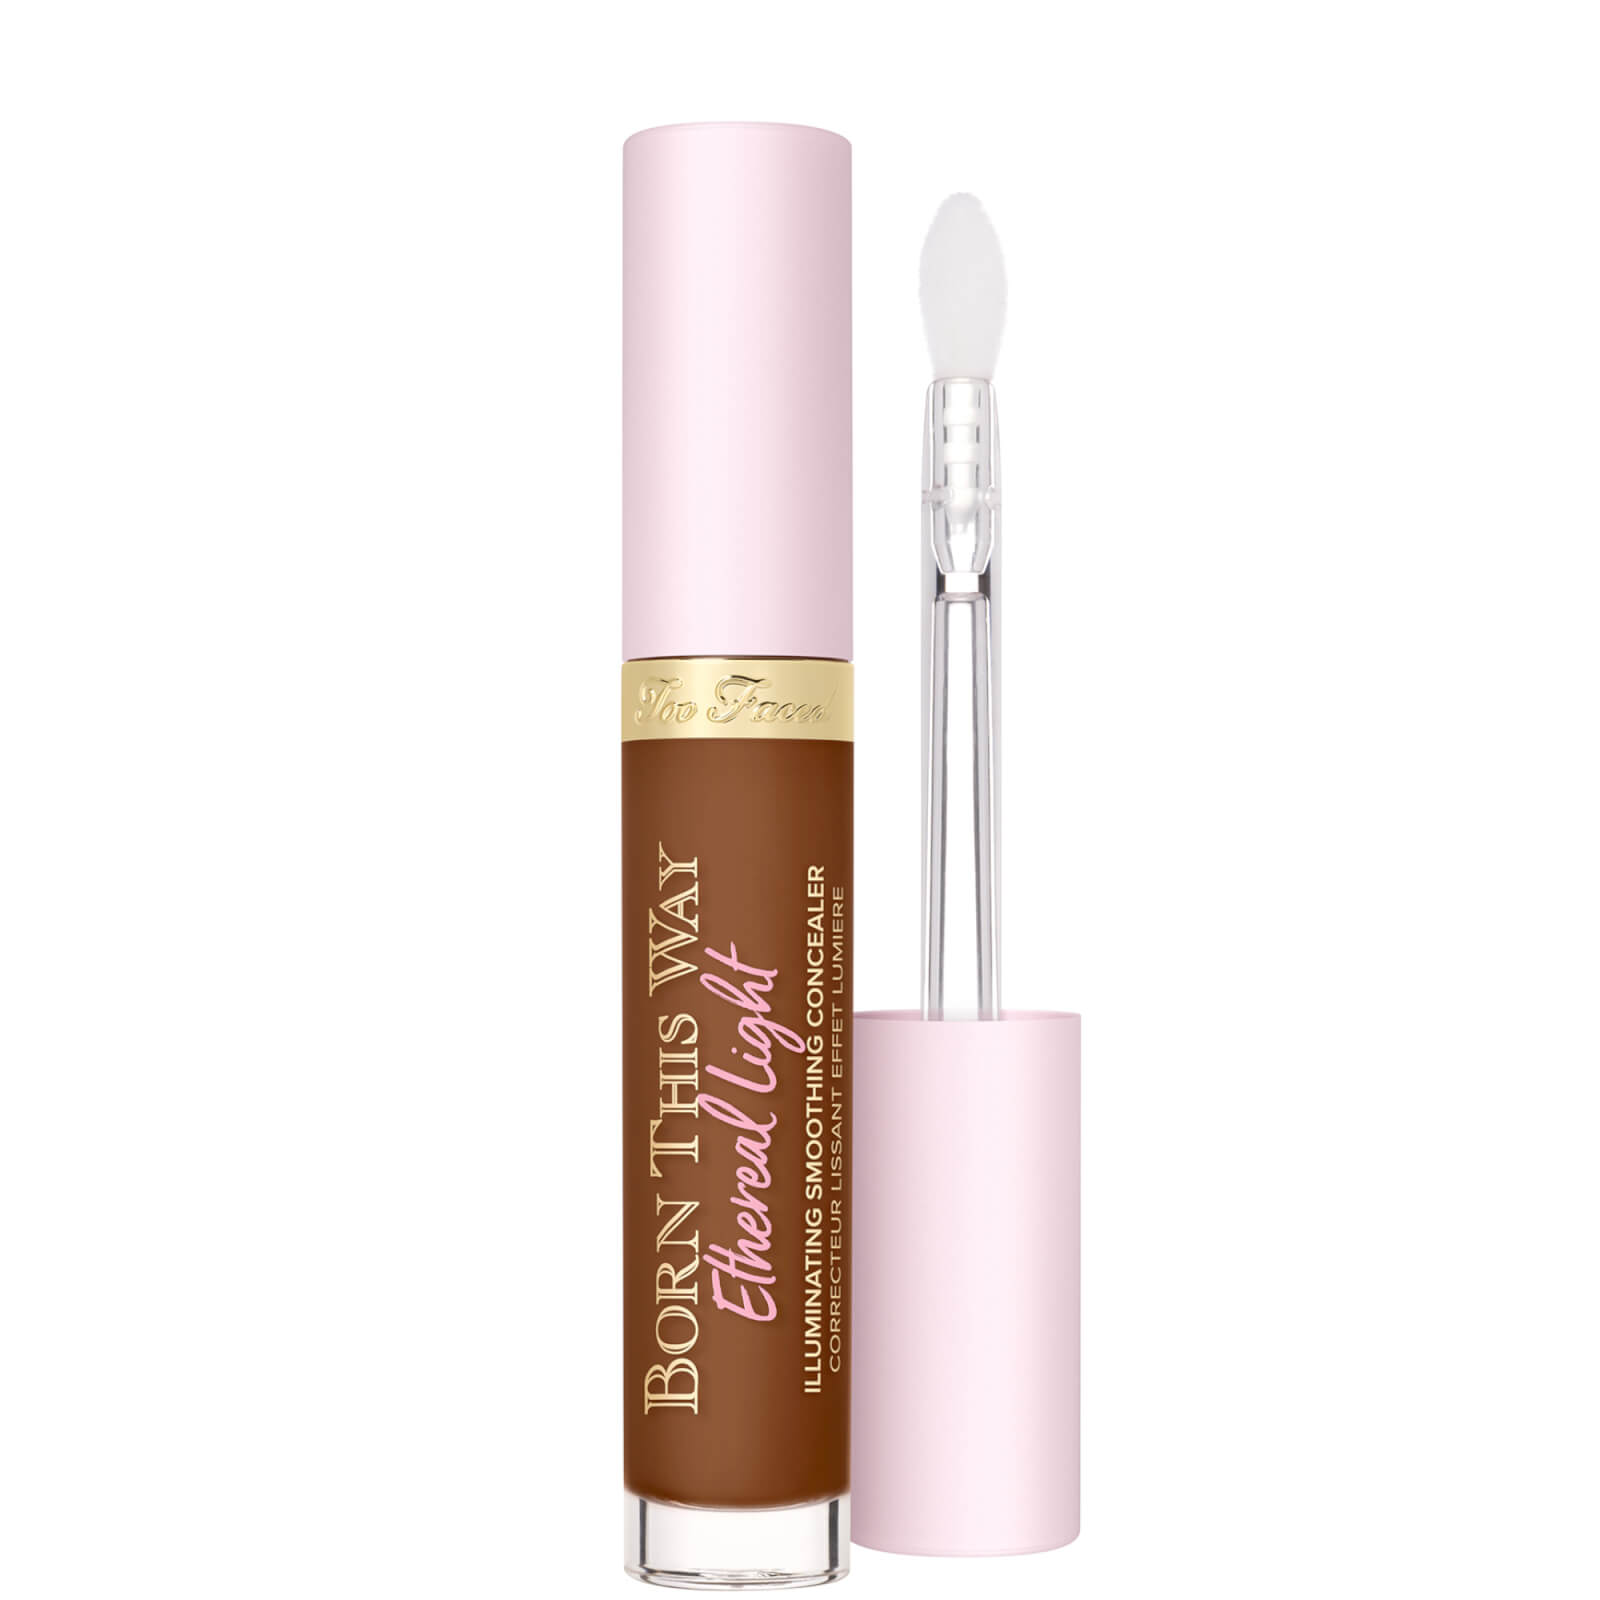 Too Faced Born This Way Ethereal Light Illuminating Smoothing Concealer 15ml (Various Shades) - Milk